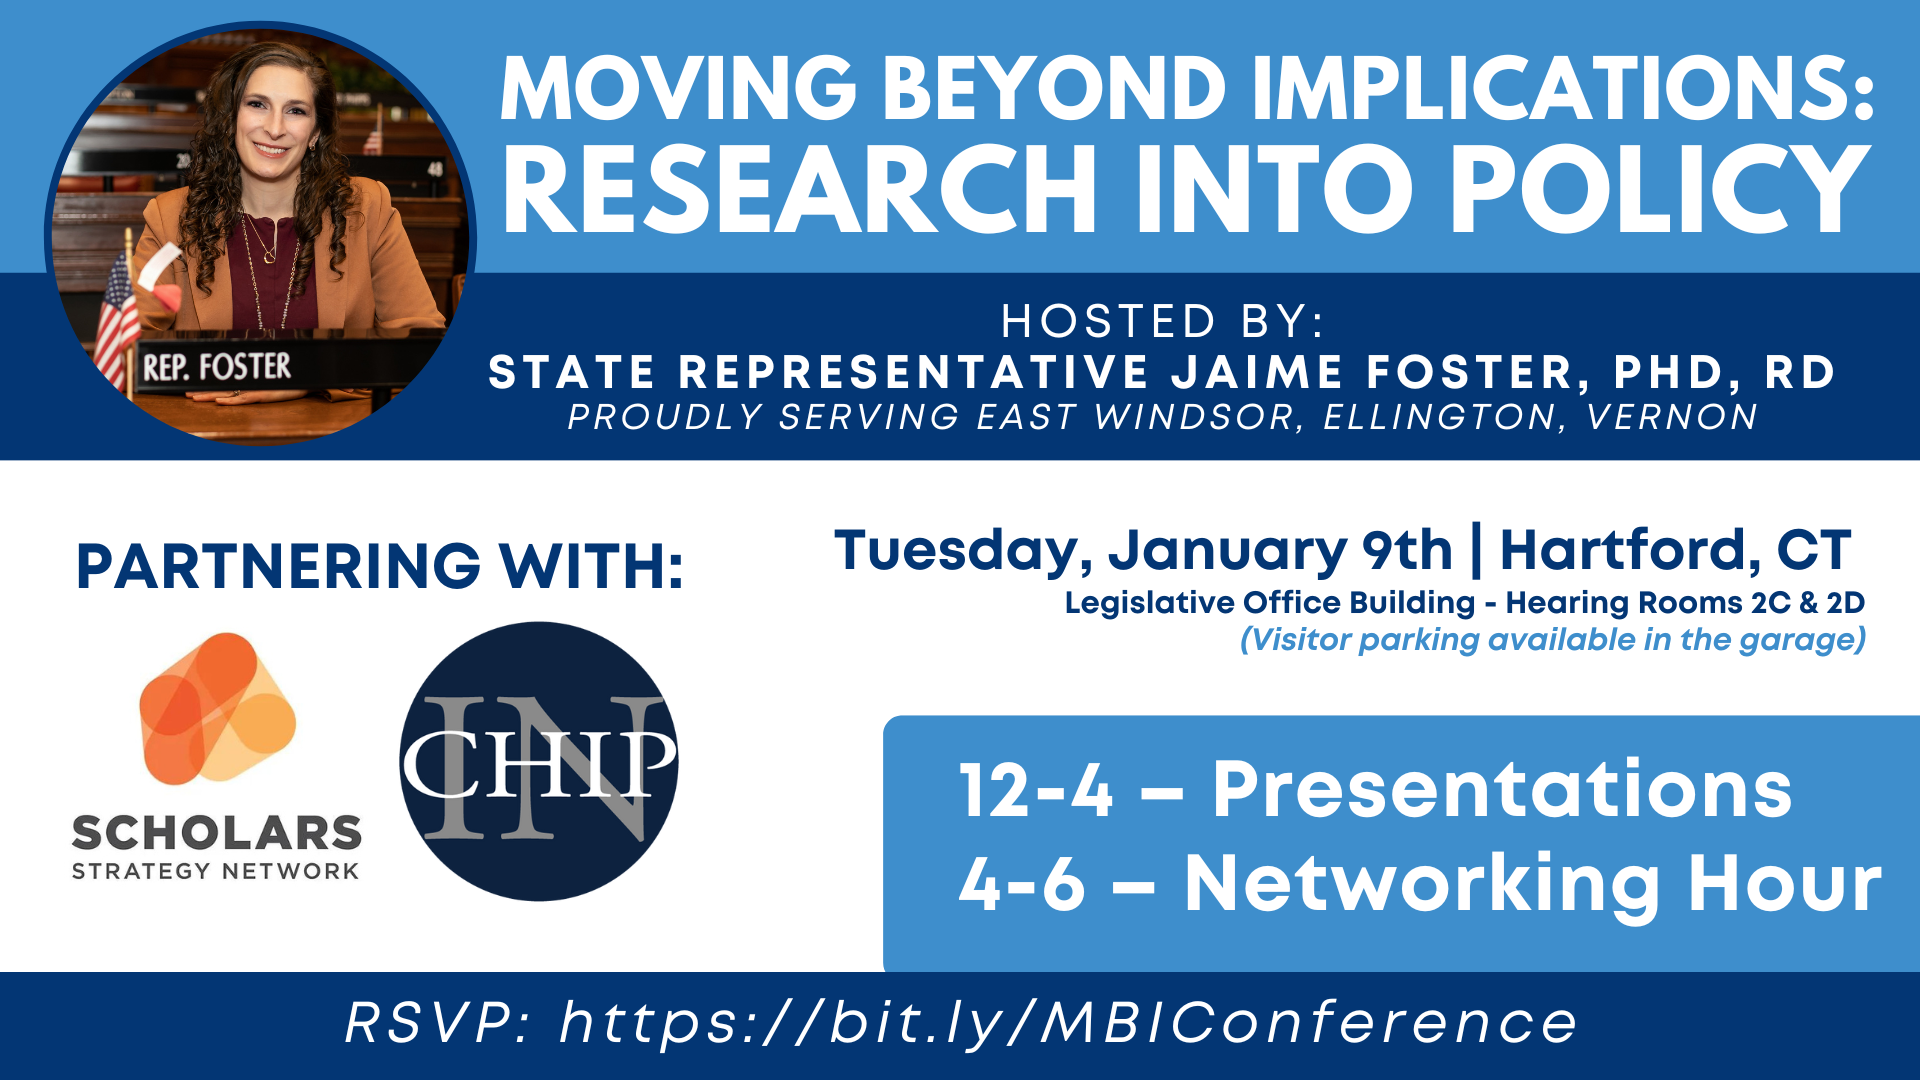 Beyond Implications Conference will take place January 9 at the Legislative Office Building from 12 p.m. to 6 p.m.